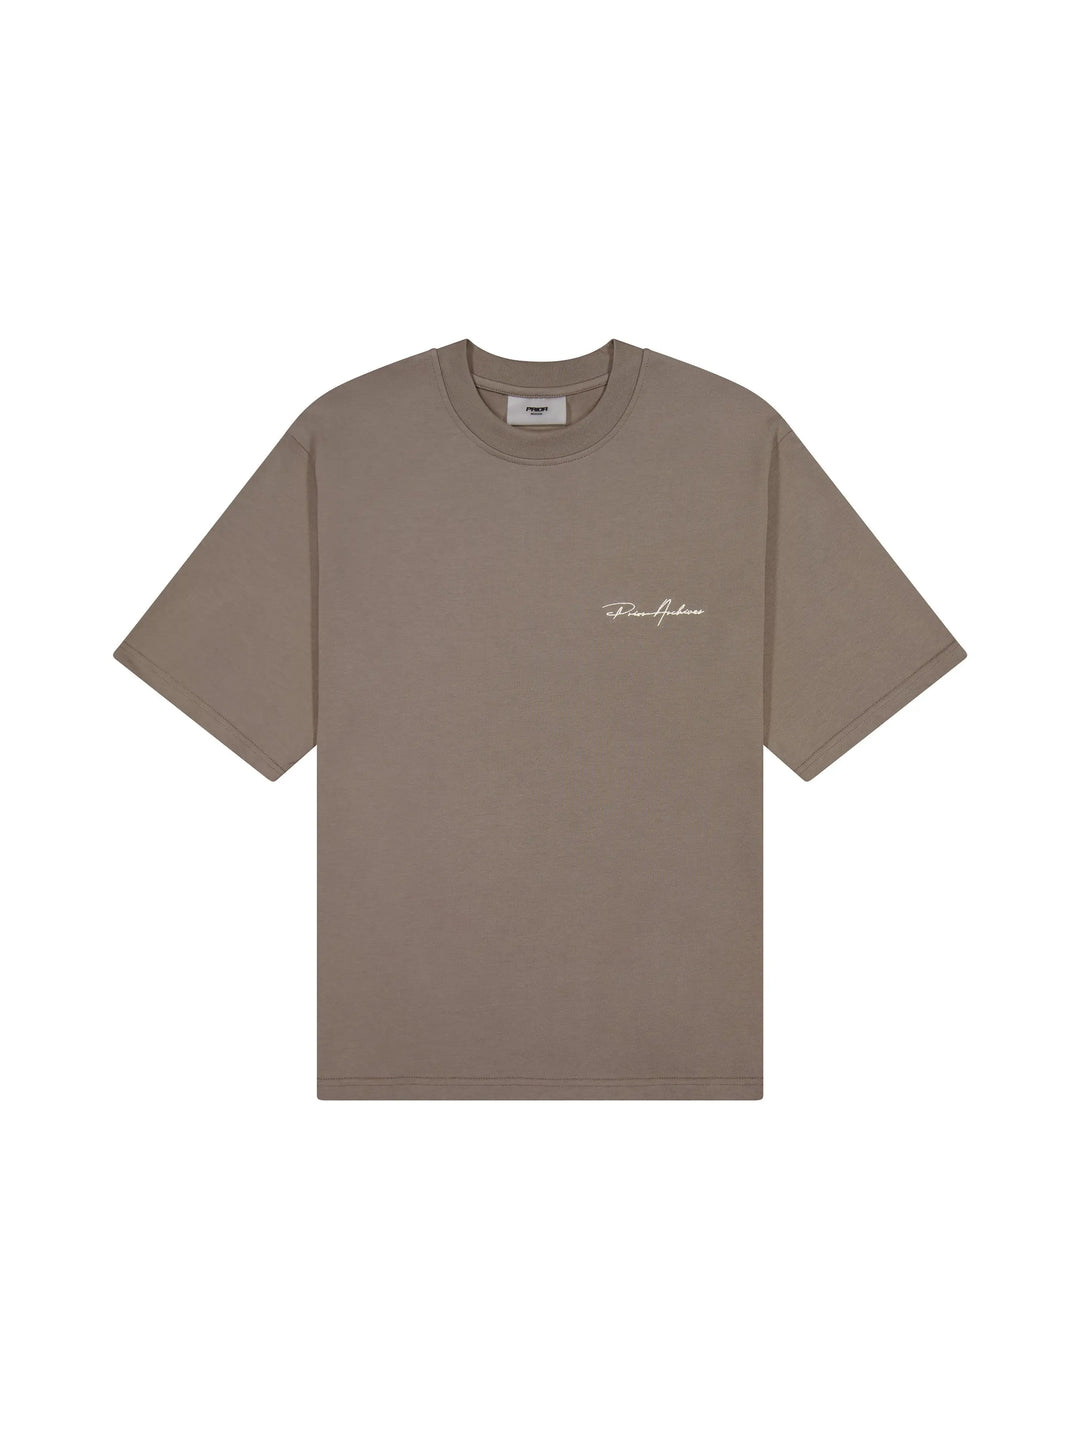 Prior Embroidery Logo Oversized T-shirt Clay Brown in Auckland, New Zealand - Shop name